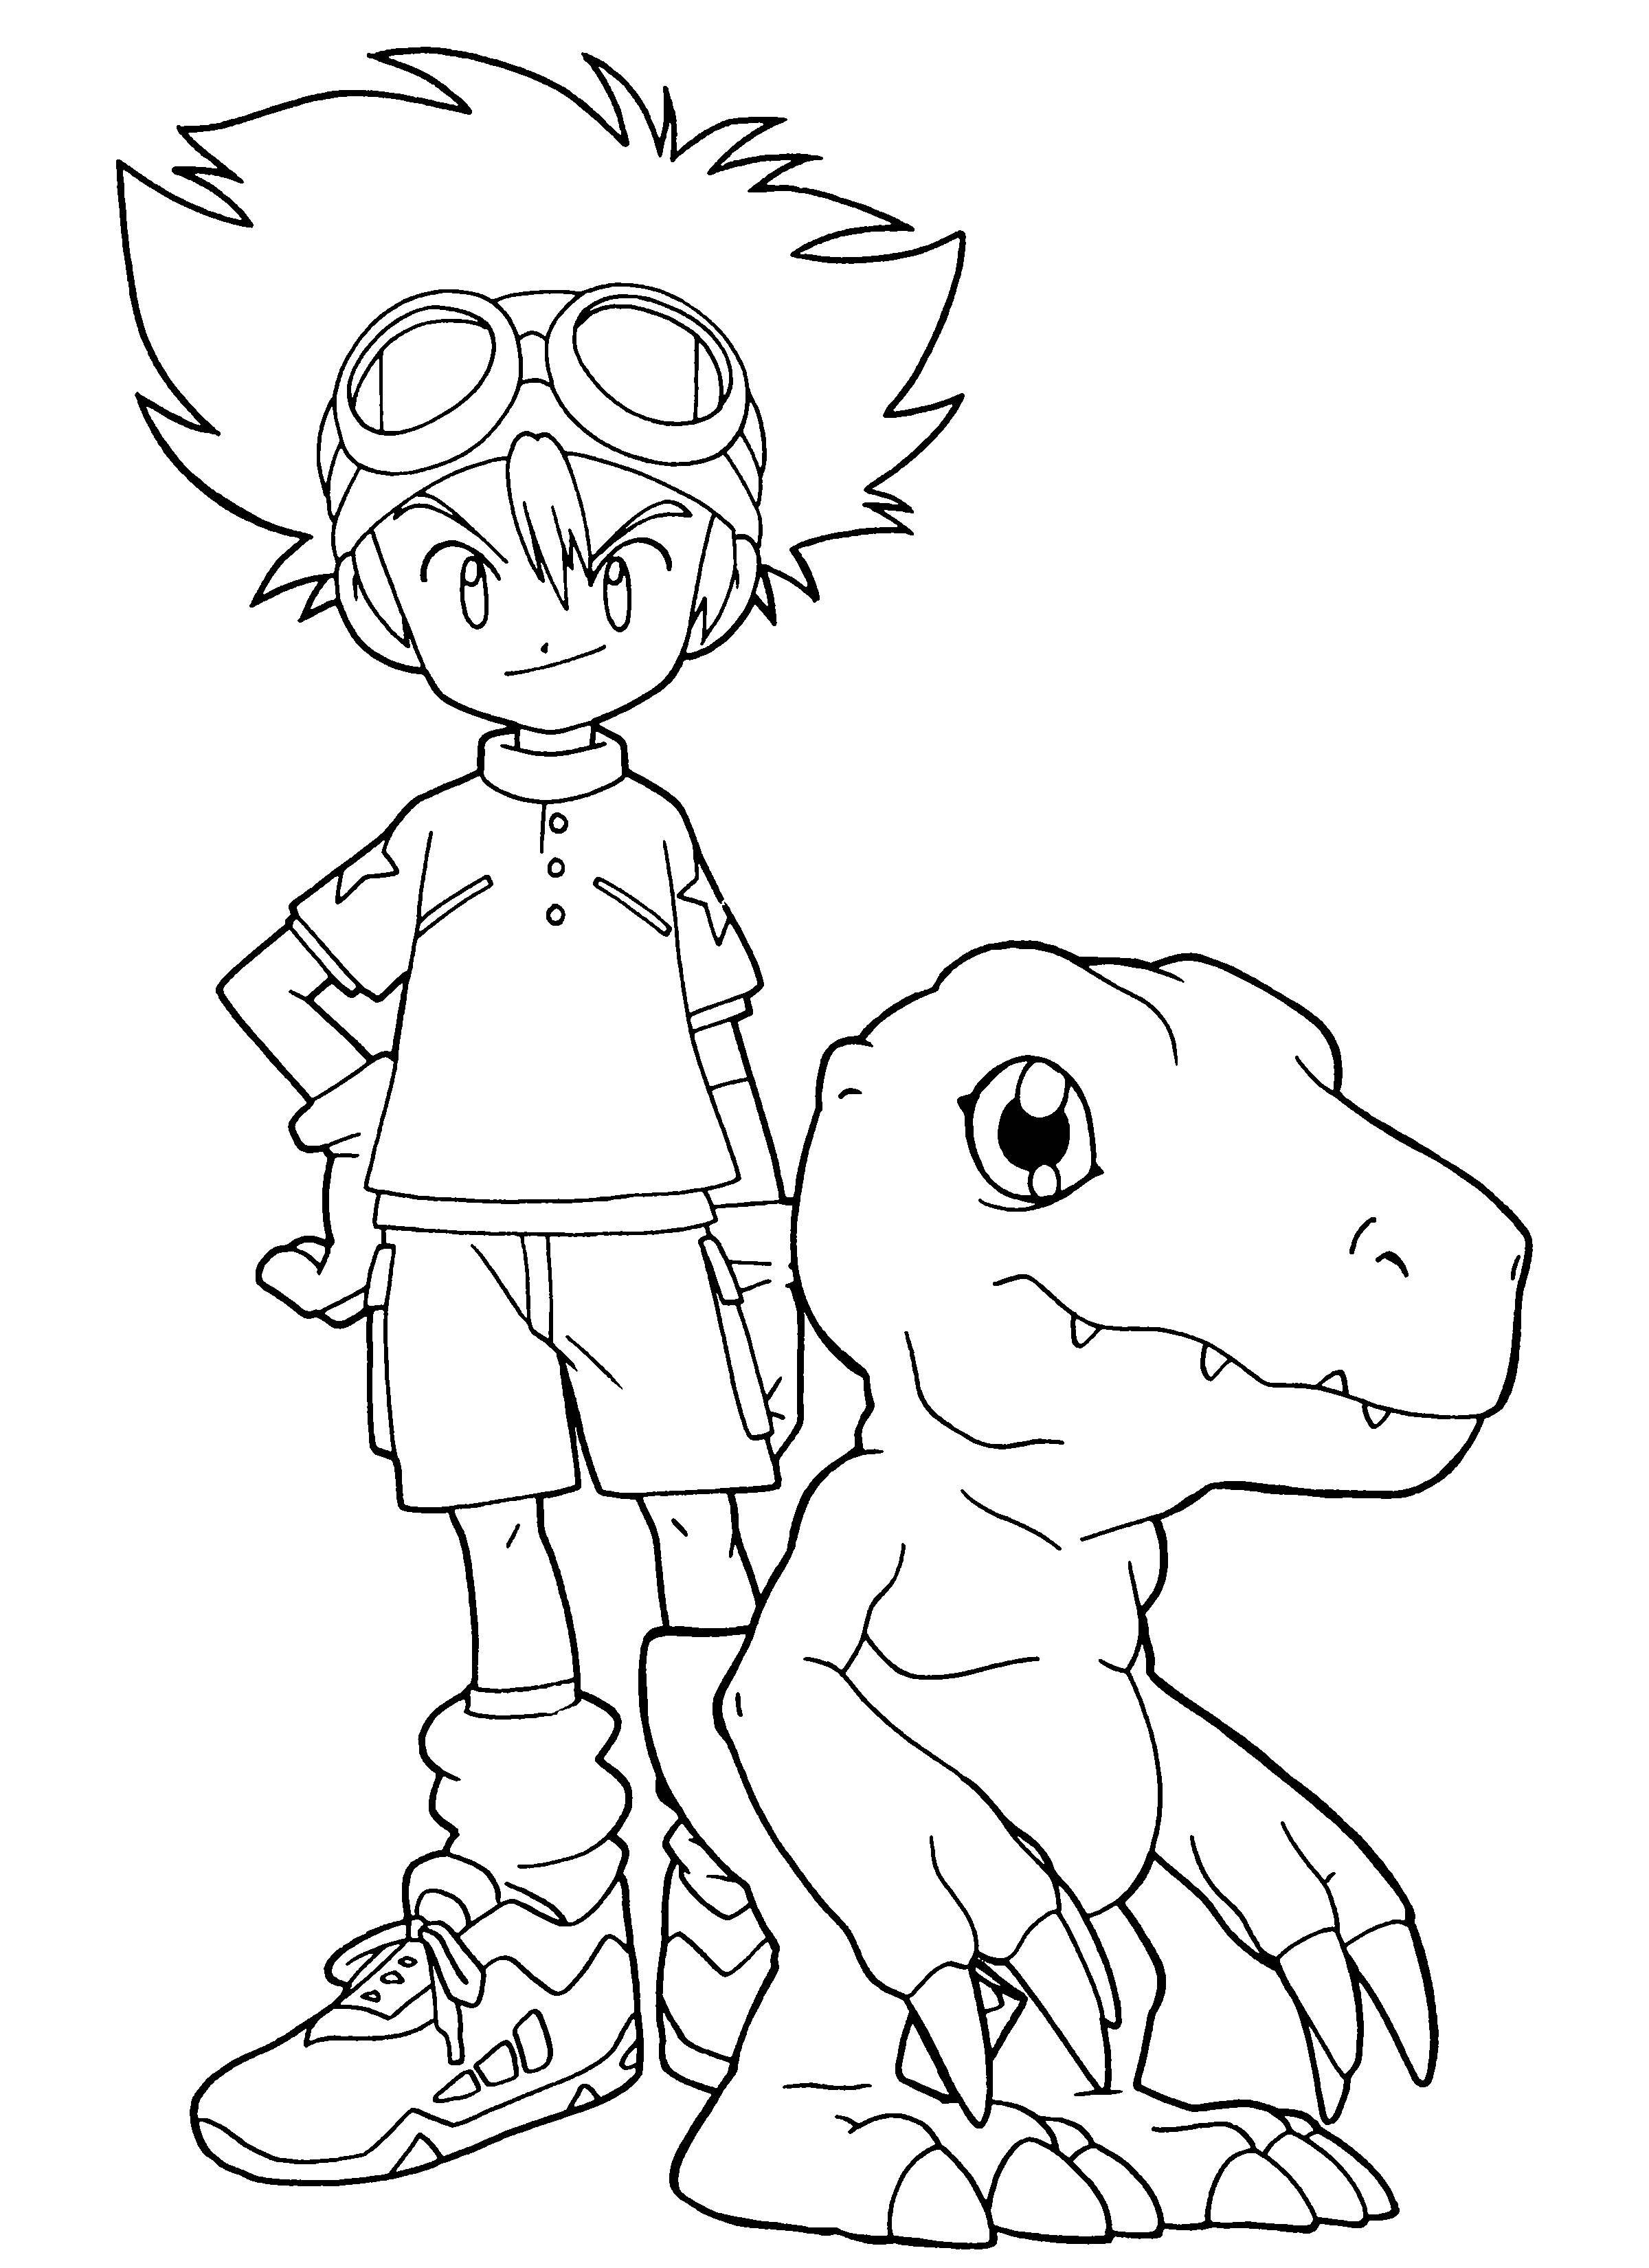 Download Free Printable Digimon Coloring Pages For Kids